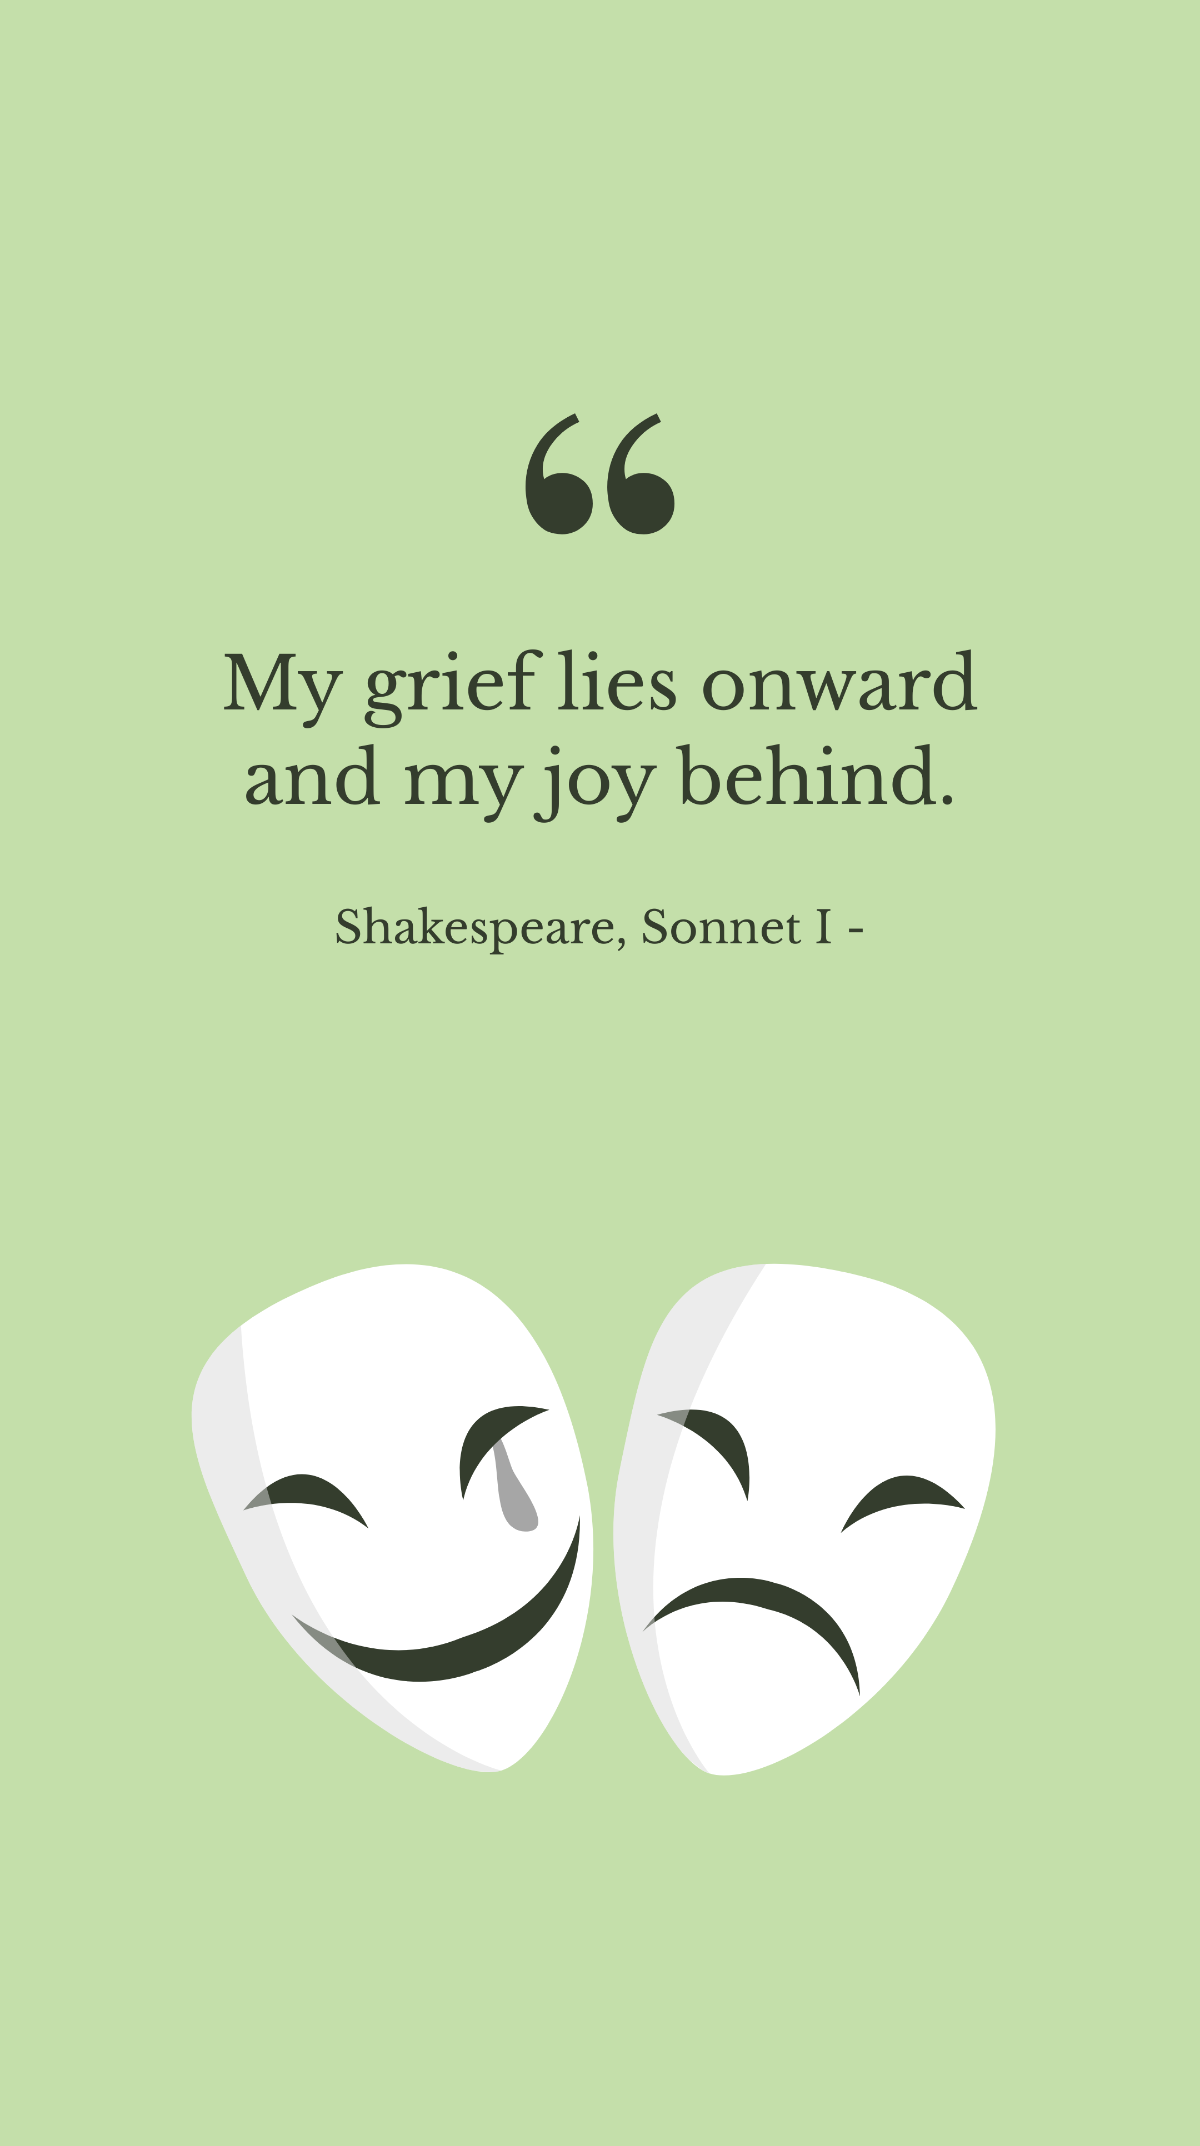 Shakespeare, Sonnet I - My grief lies onward and my joy behind. Template